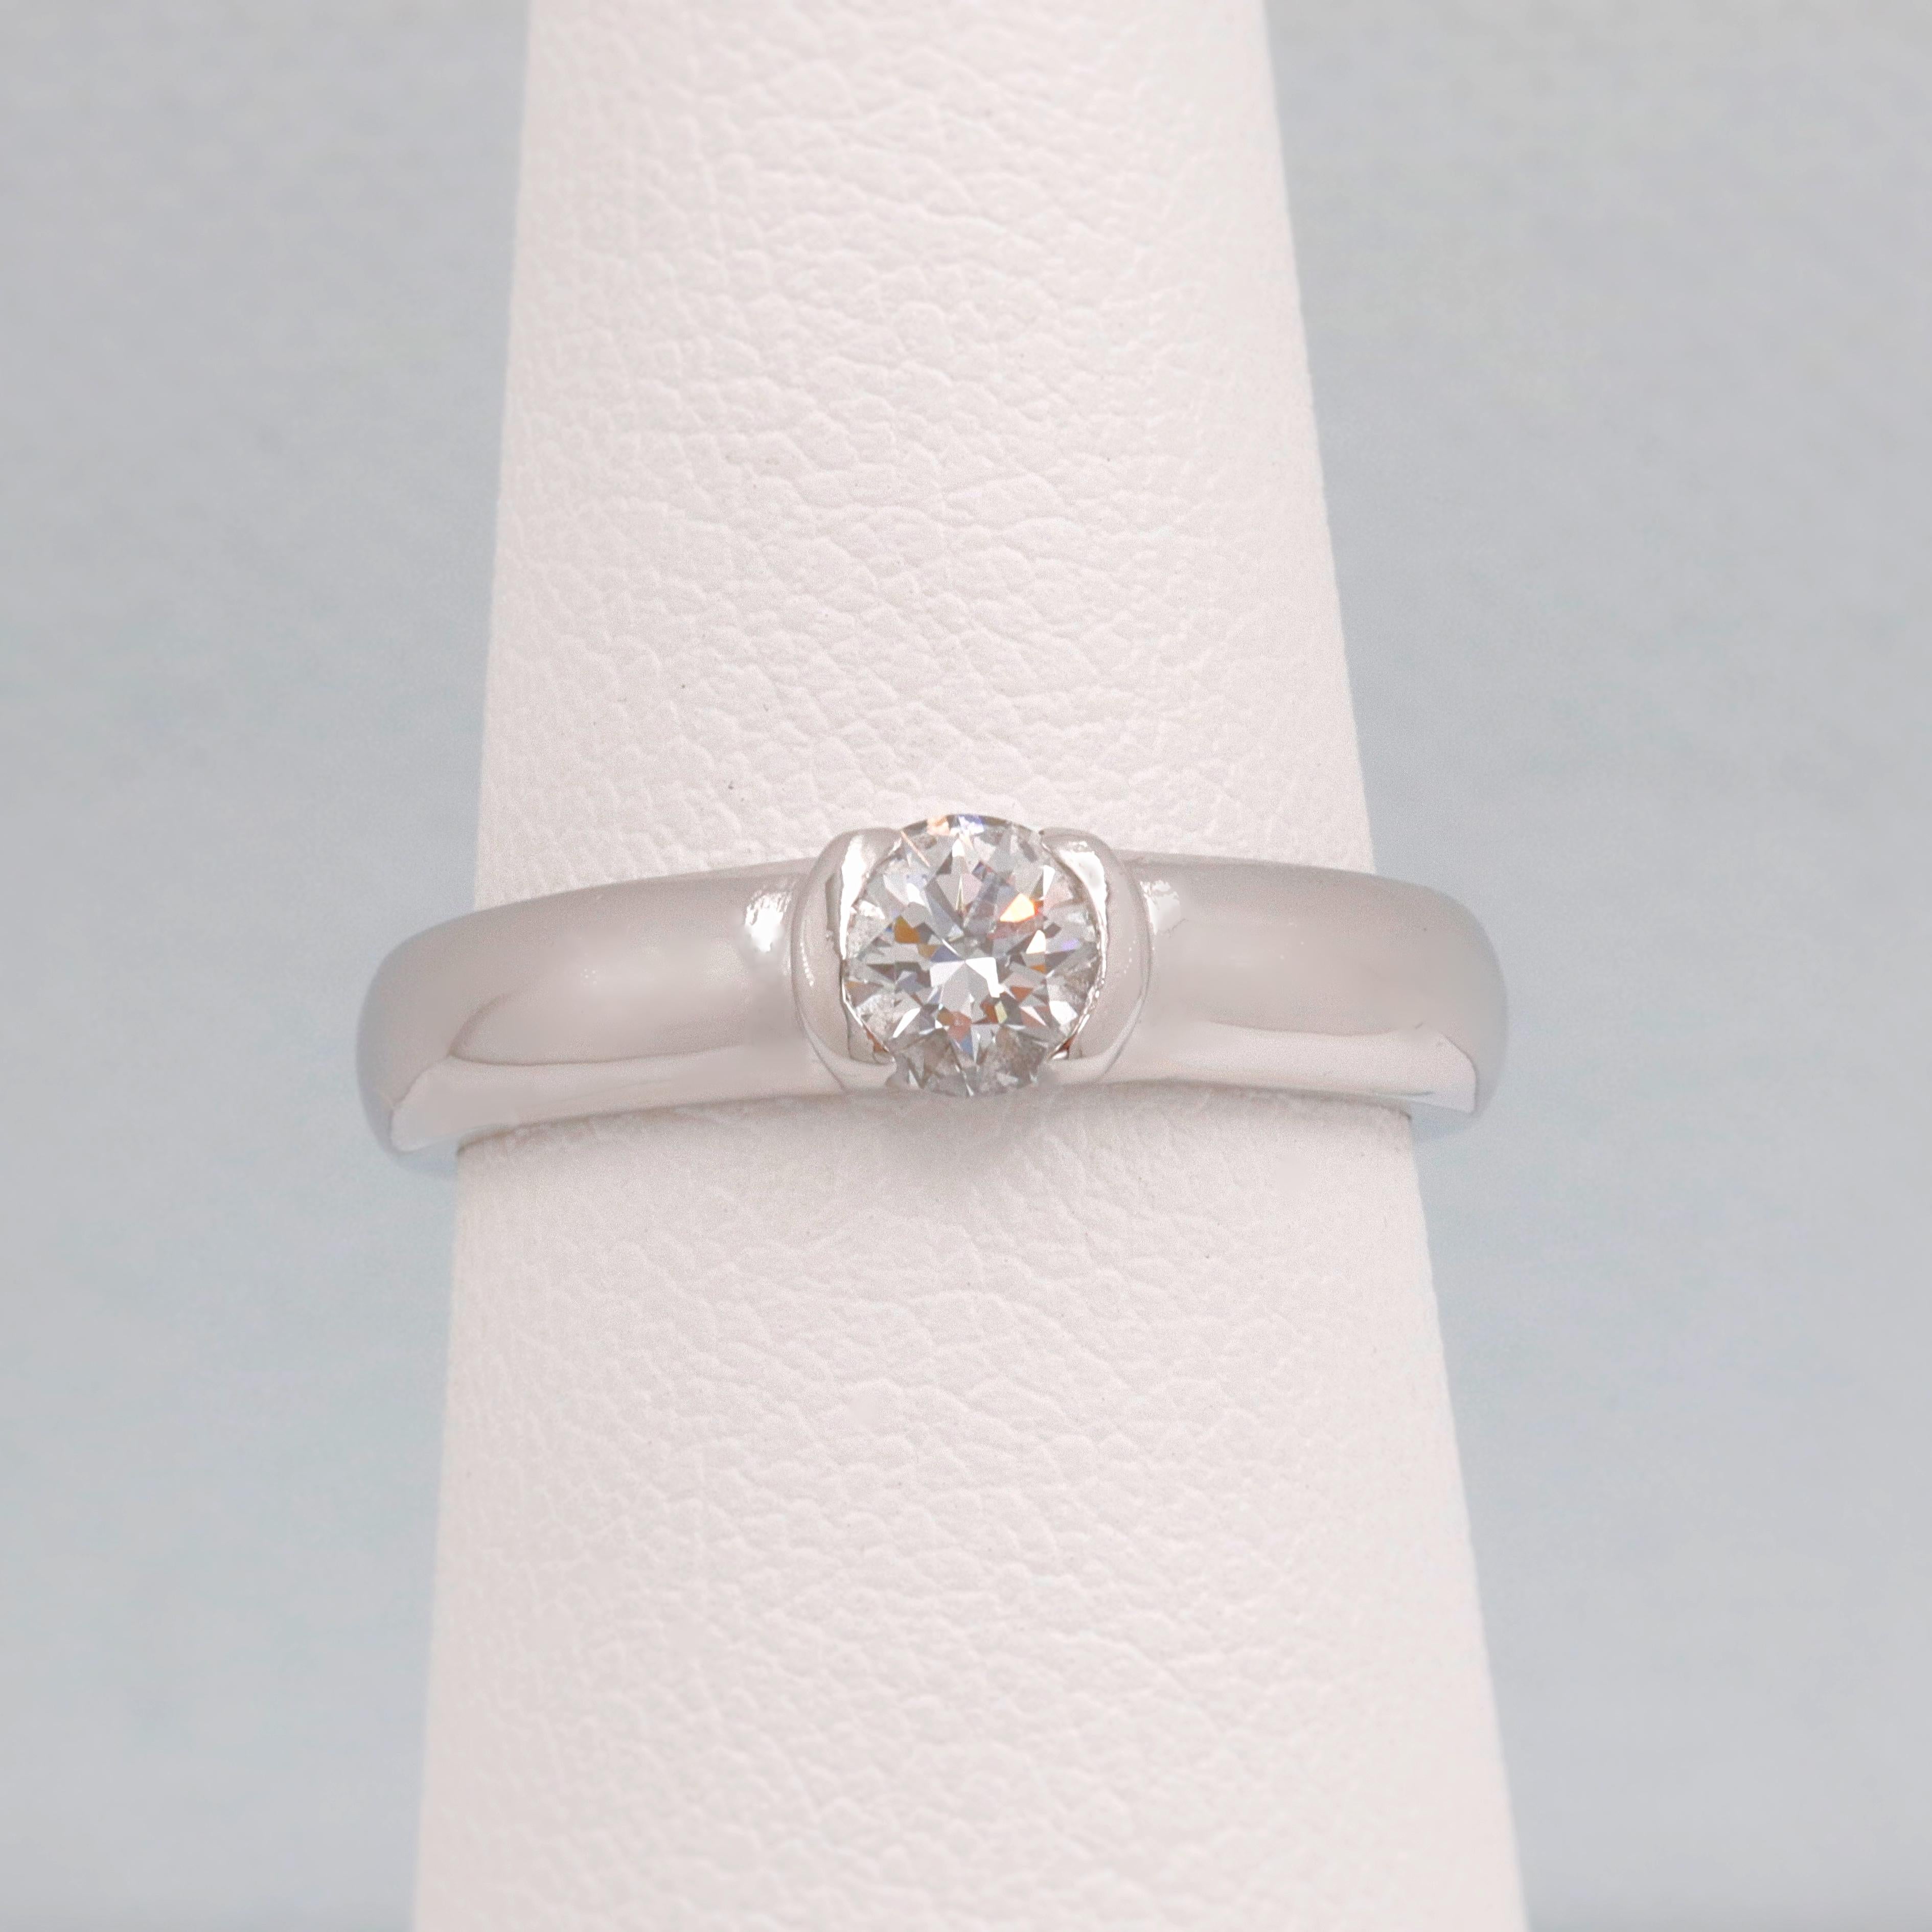 Tiffany & Co.

Style:  ETOILE Diamond Engagement Ring
Serial Number:  D29900
Metal:  Platinum PT950
Size:  6 - sizable
Total Carat Weight:  0.39 CTS
Diamond Shape:  Round Brilliant 0.39 cts
Diamond Color & Clarity:   
Hallmark:  ©TIFFANY&CO. PT950